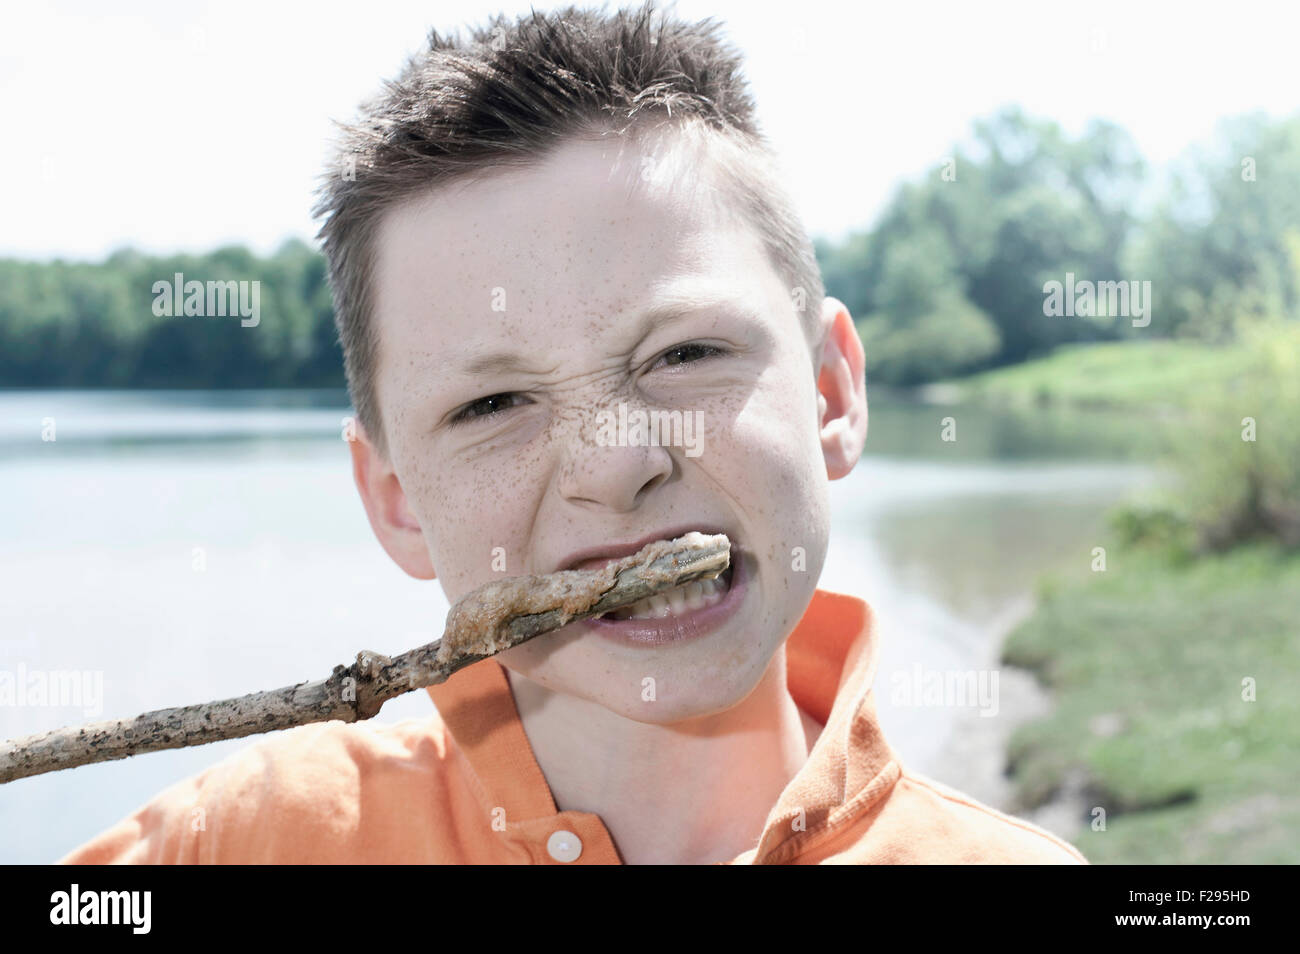 Close-up of a boy eating sausage, Bavaria, Germany Stock Photo